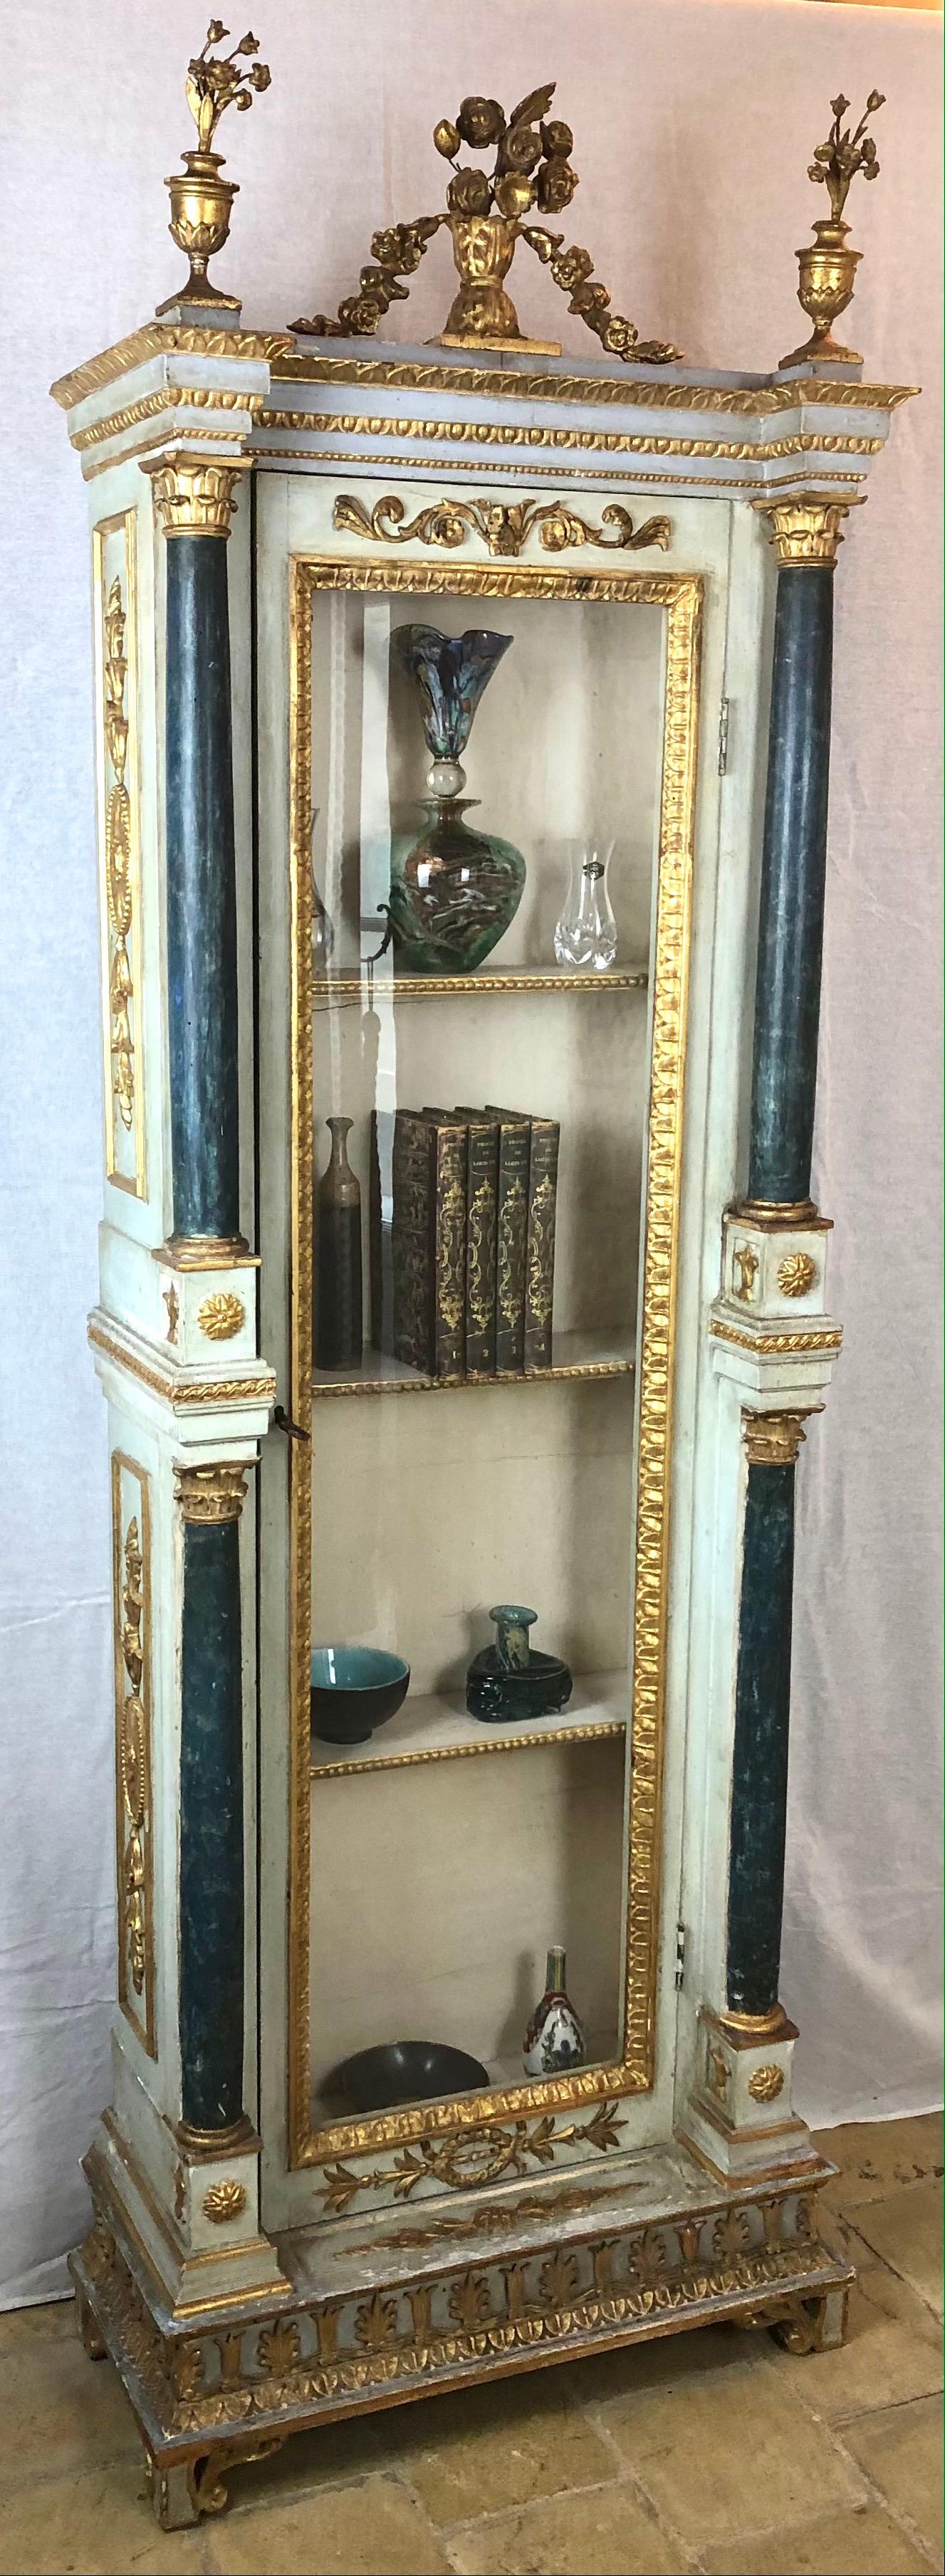 An exquisite Venetian cabinet with remarkable Rococo period details. 
Gilt wood and painted in a very appealing and eye catching colors. 

This ornate Italian cabinet is decorated with hand-carved details and hand-painted throughout. It has